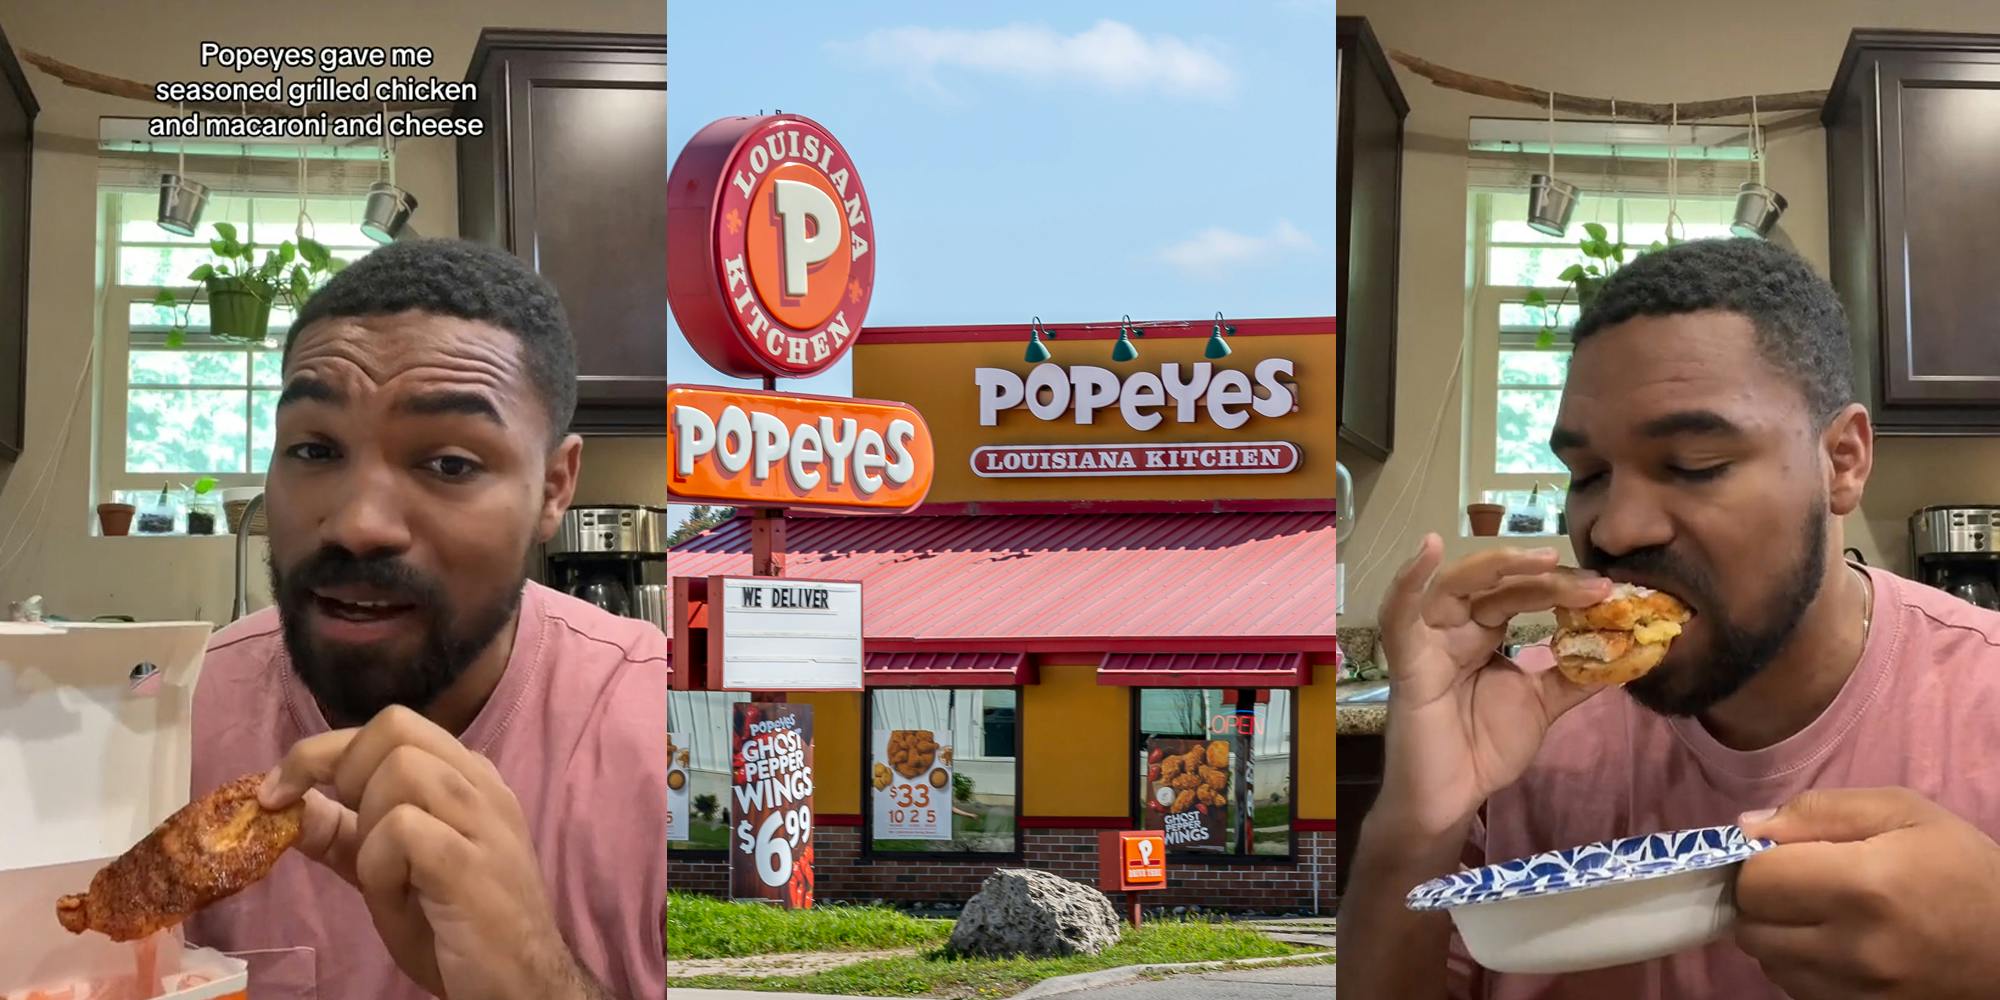 Popeyes customer with caption "Popeyes gave me seasoned grilled chicken and macaroni and cheese" (l) Popeyes restaurant with signs (c) Popeyes customer eating strawberry biscuit hack (r)